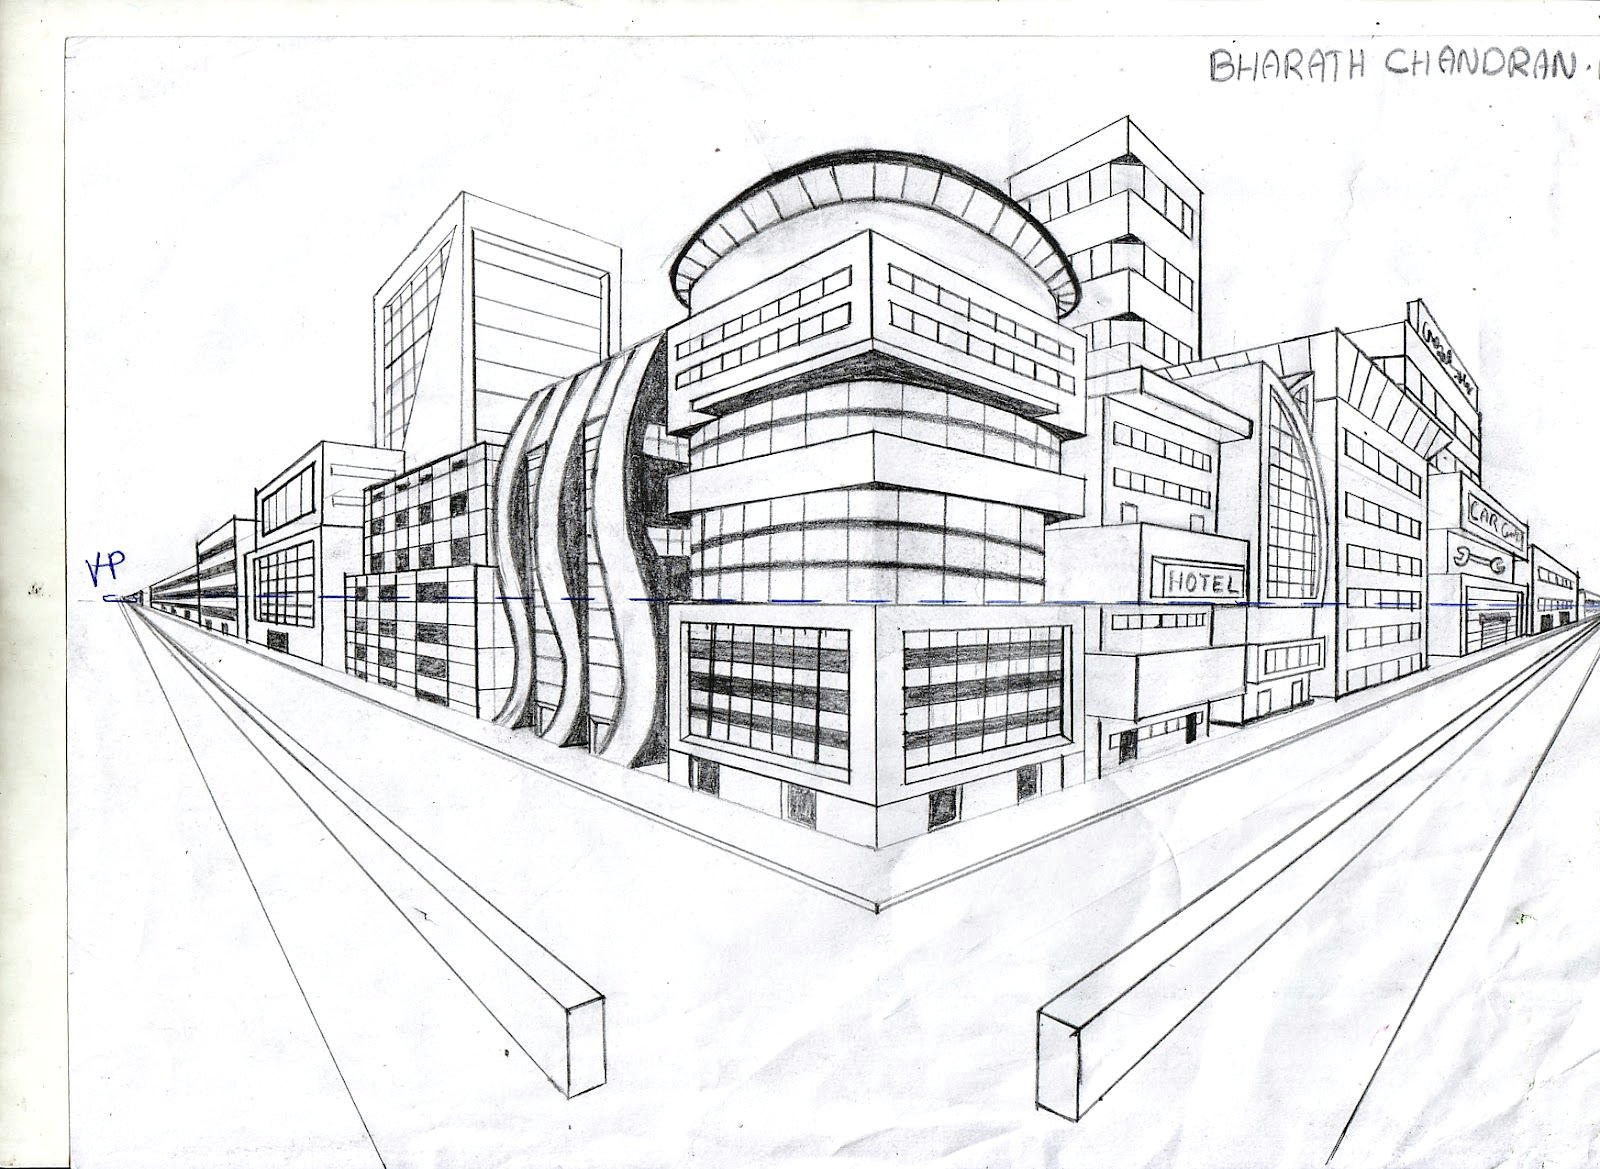 2 pt perspective lesson plan point perspective art projects http foundationartsofbc